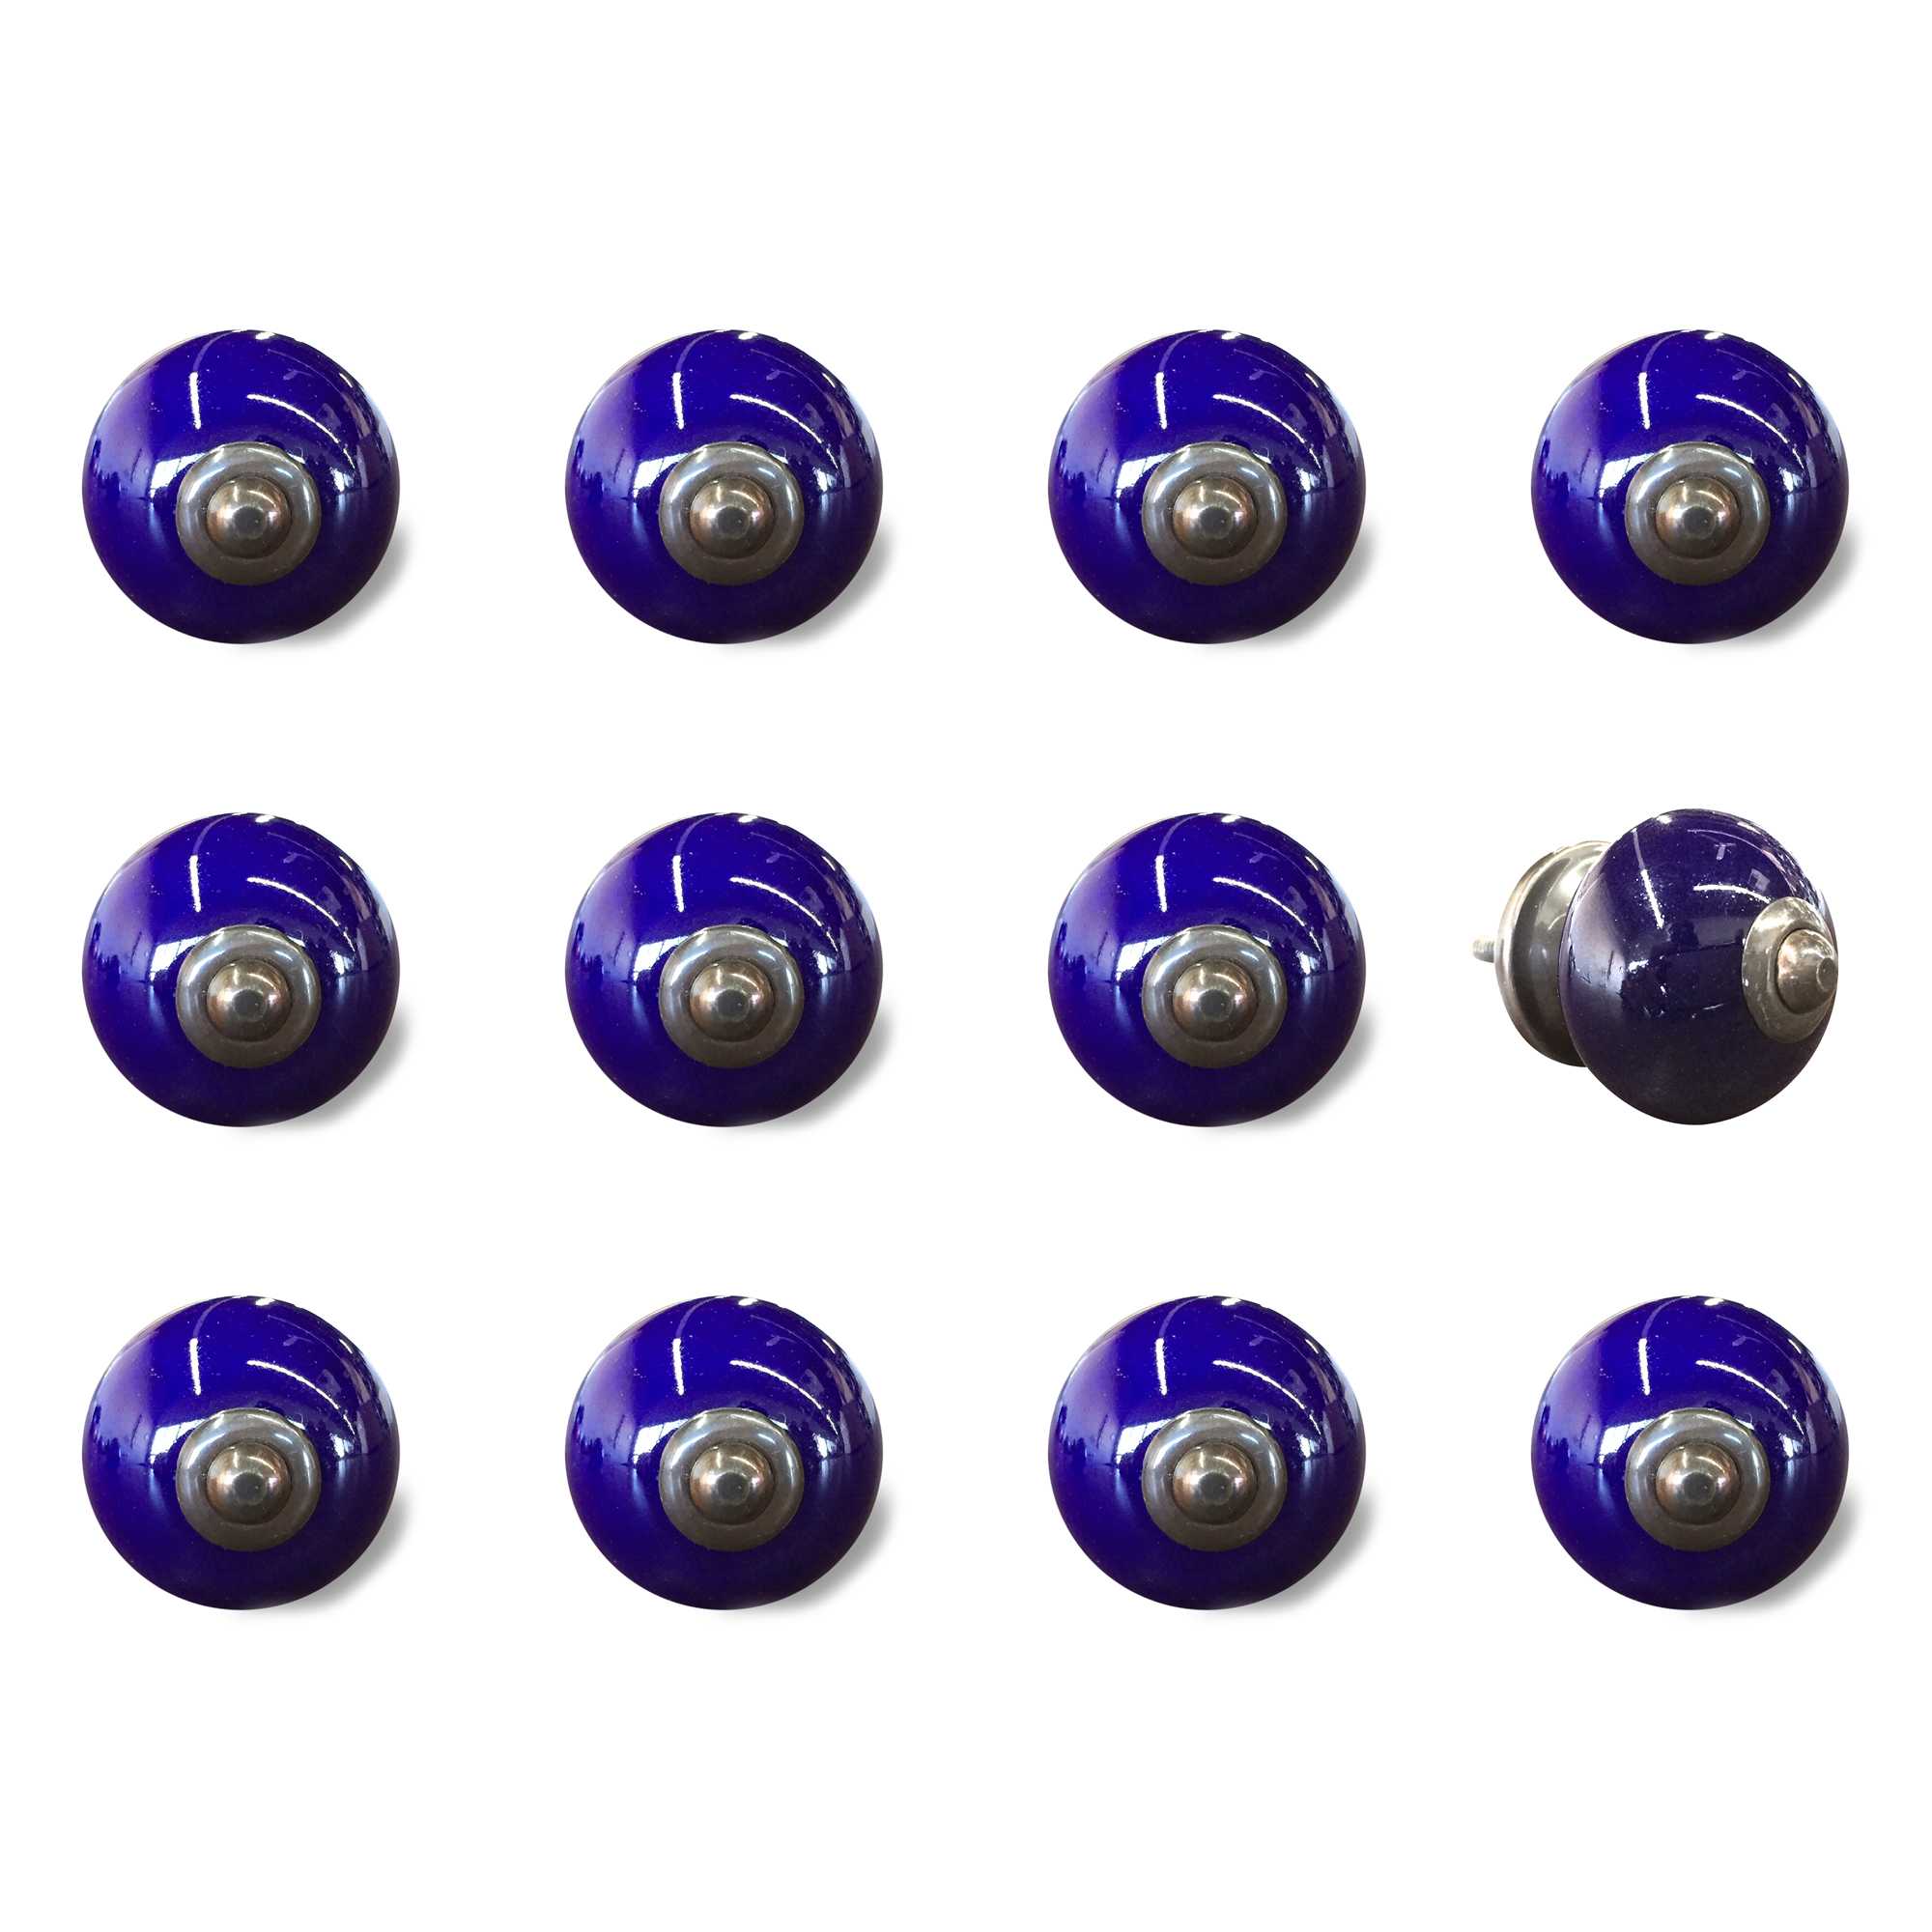 1.5" x 1.5" x 1.5" Navy and Copper - Knobs 12-Pack